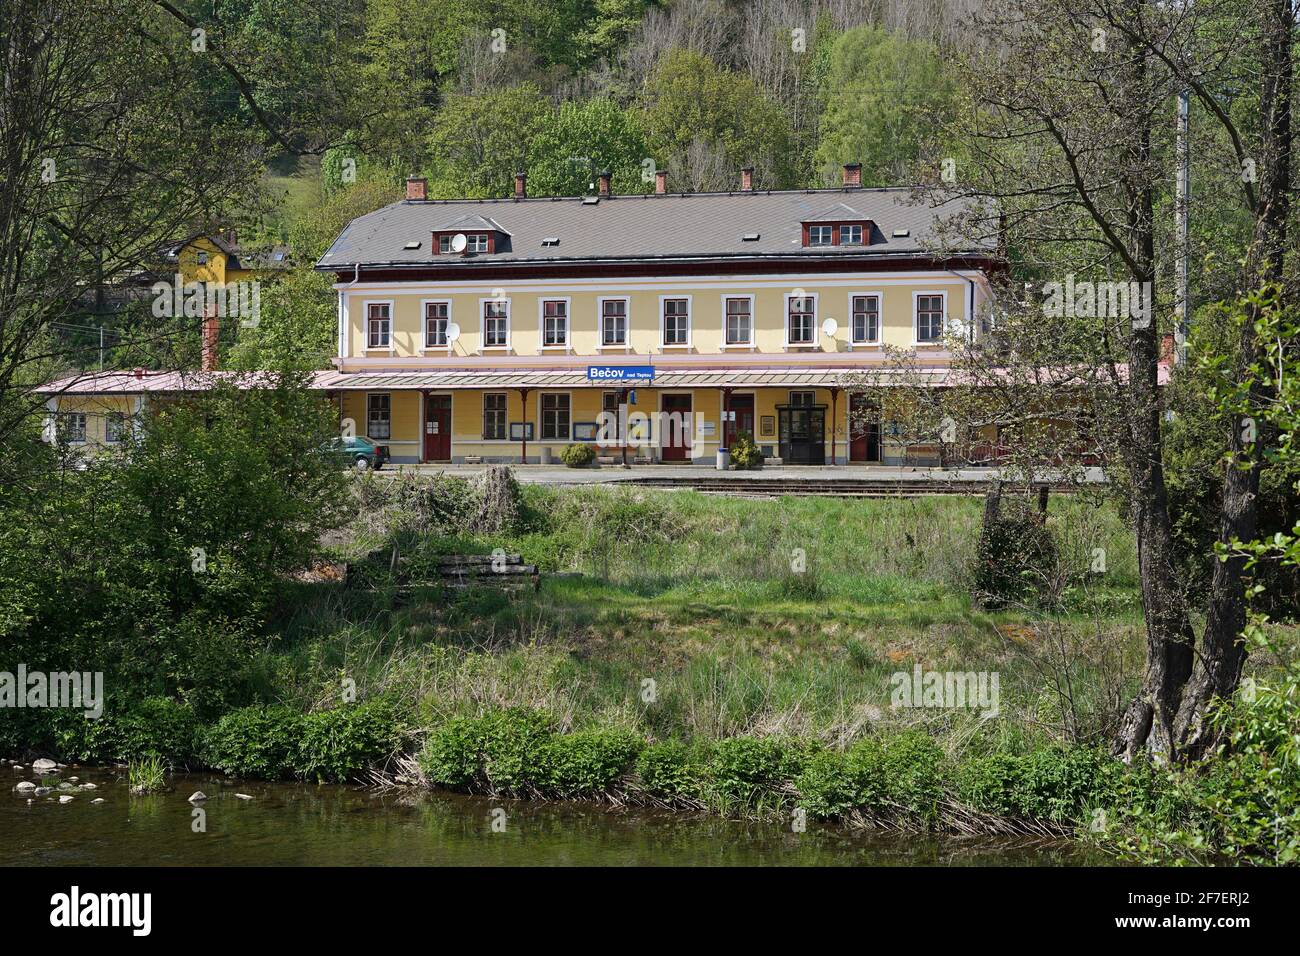 Becov, Czech Republic - May 17 2020: Historic railway station in the middle of beautiful nature, one of the most unique railway in the world Stock Photo